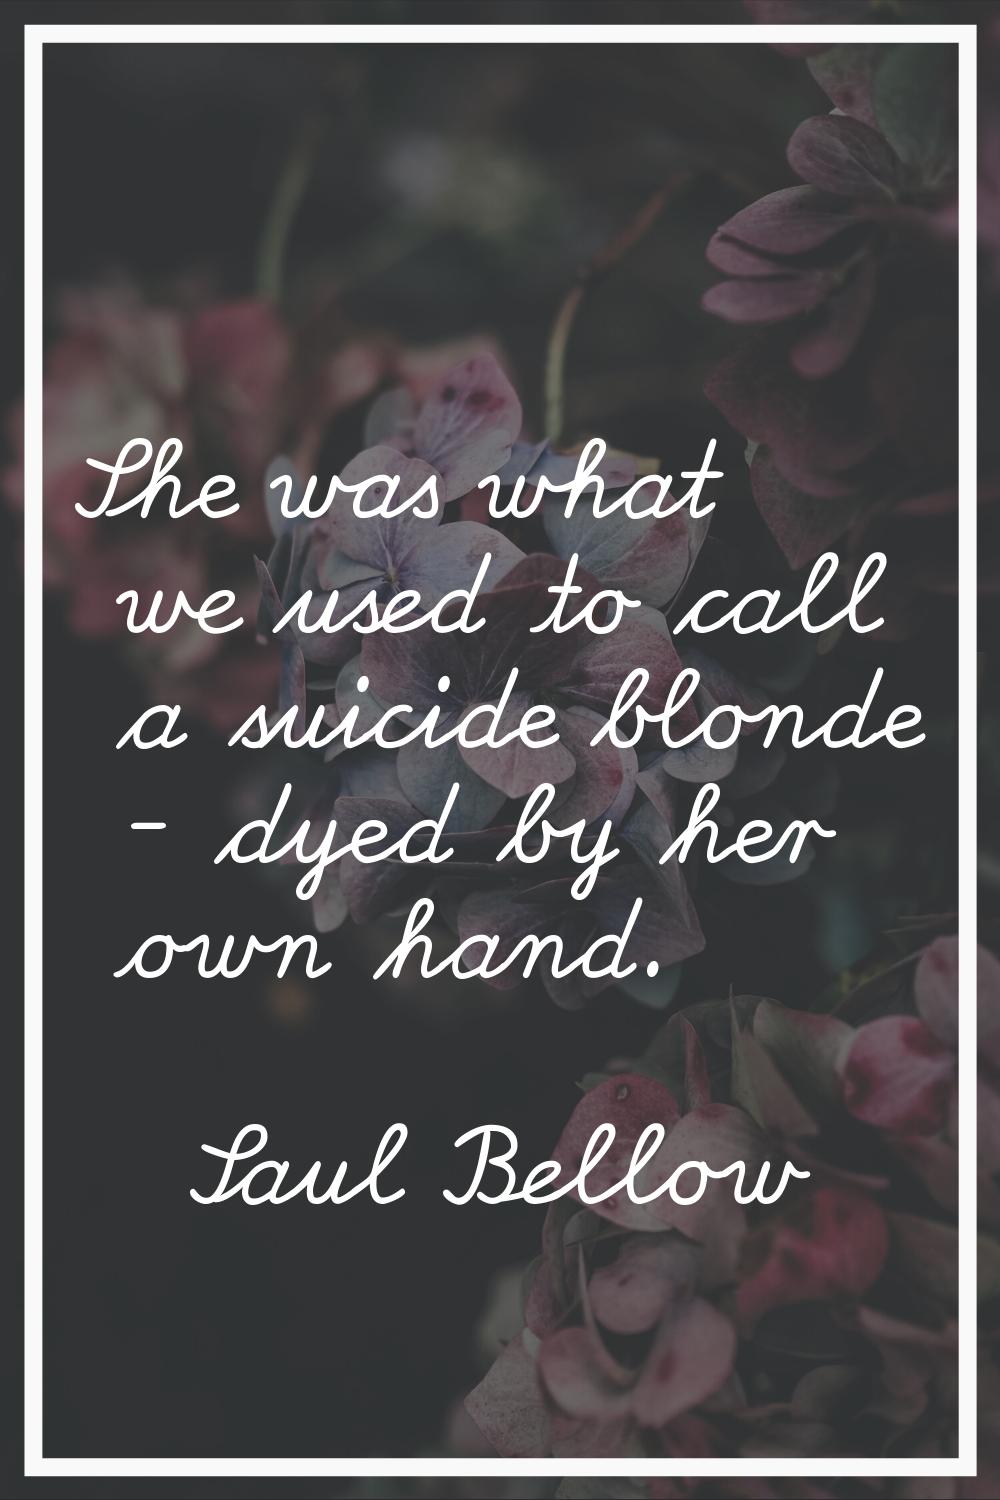 She was what we used to call a suicide blonde - dyed by her own hand.